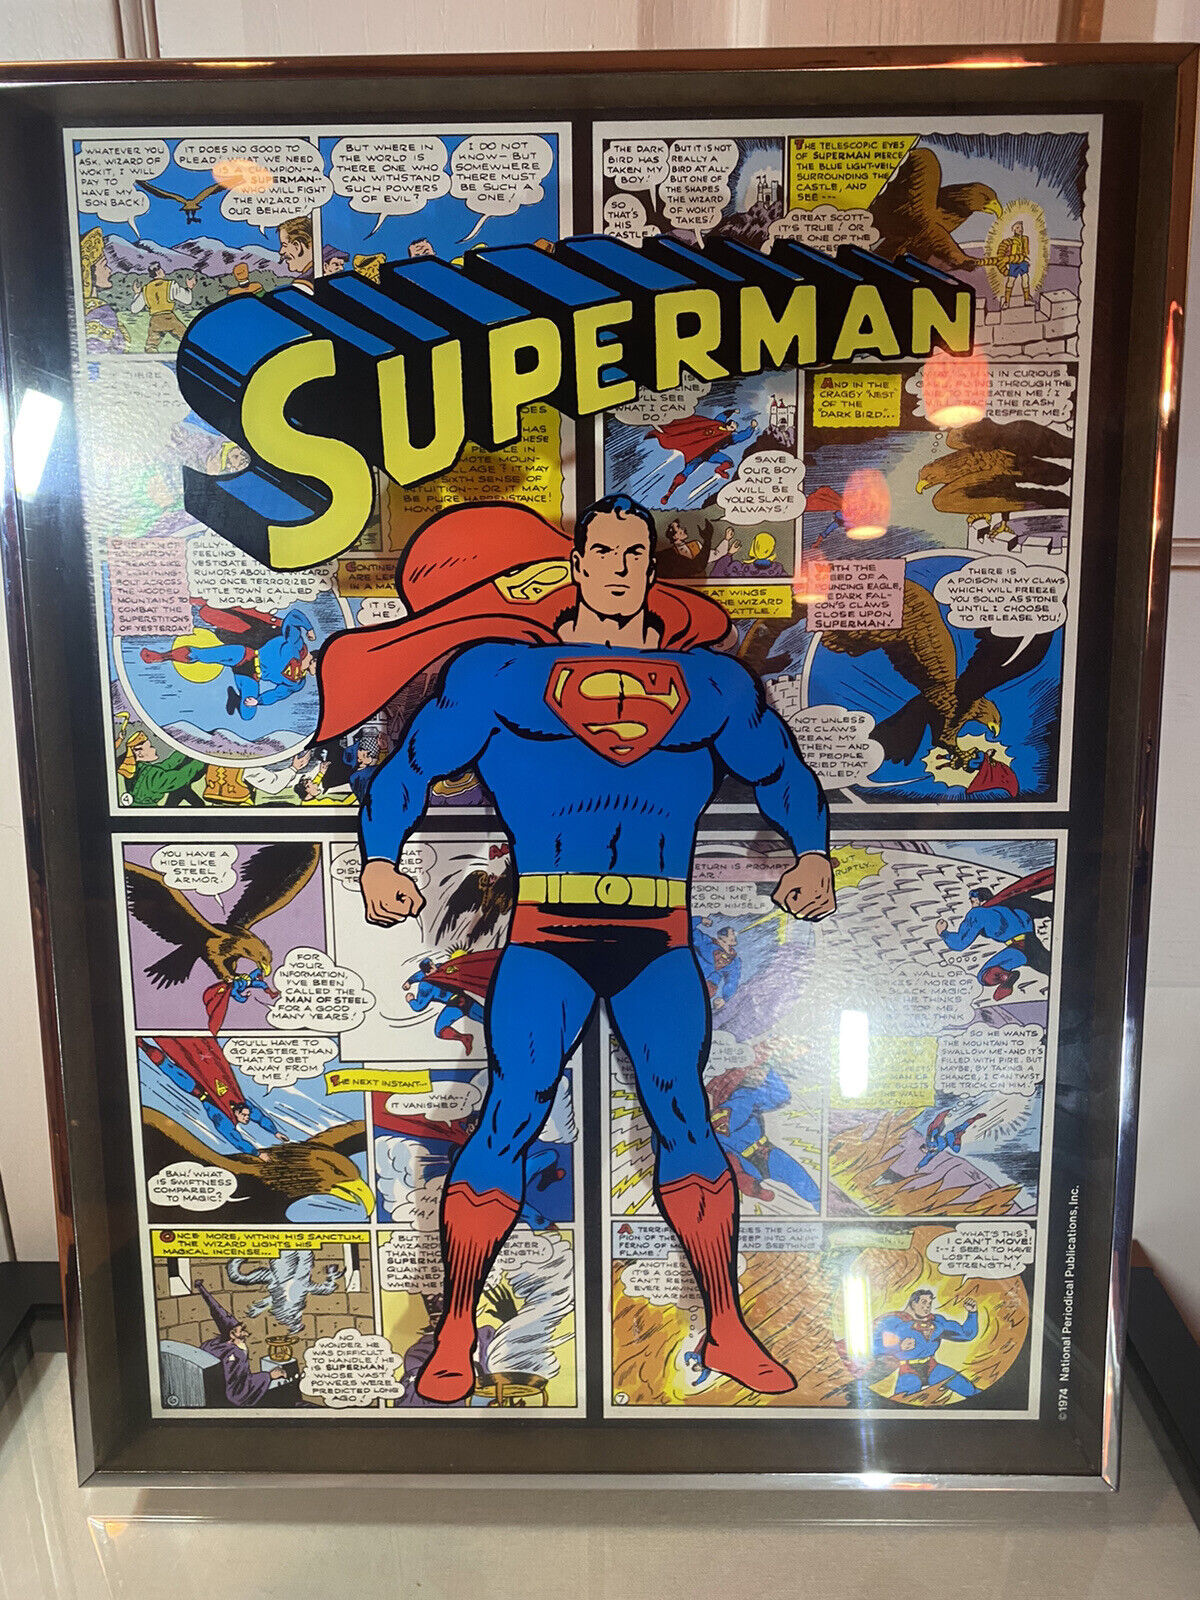 RARE SUPERMAN 1974 3-D SHADOW-BOX COMIC. Don’t Miss Out